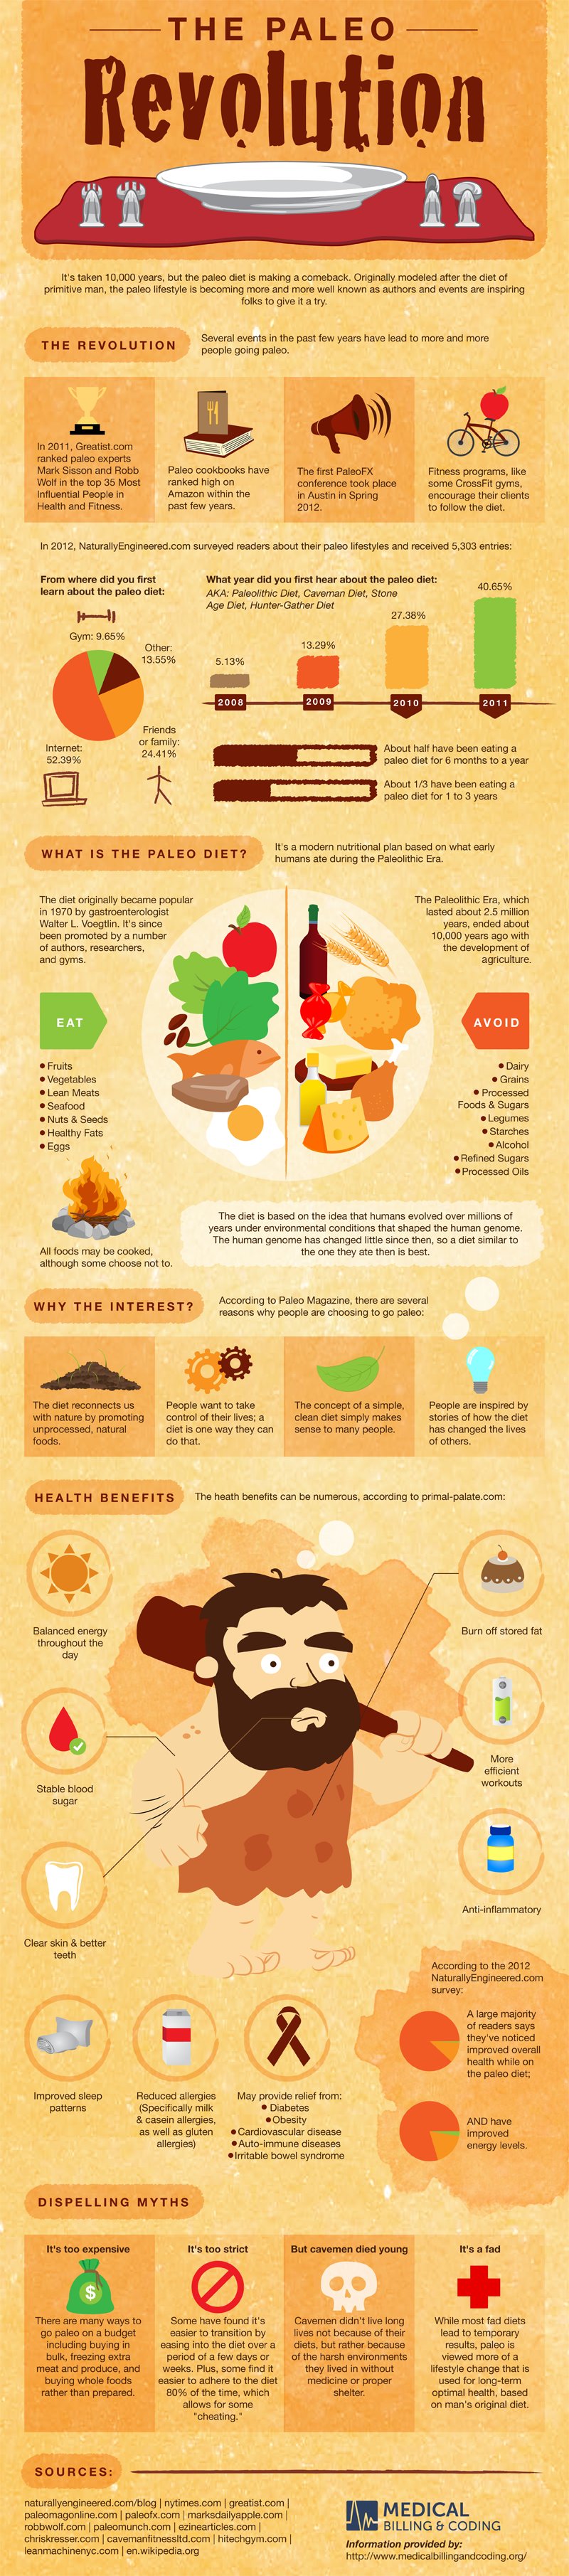 InfoGraphic on the Paleo Diet,